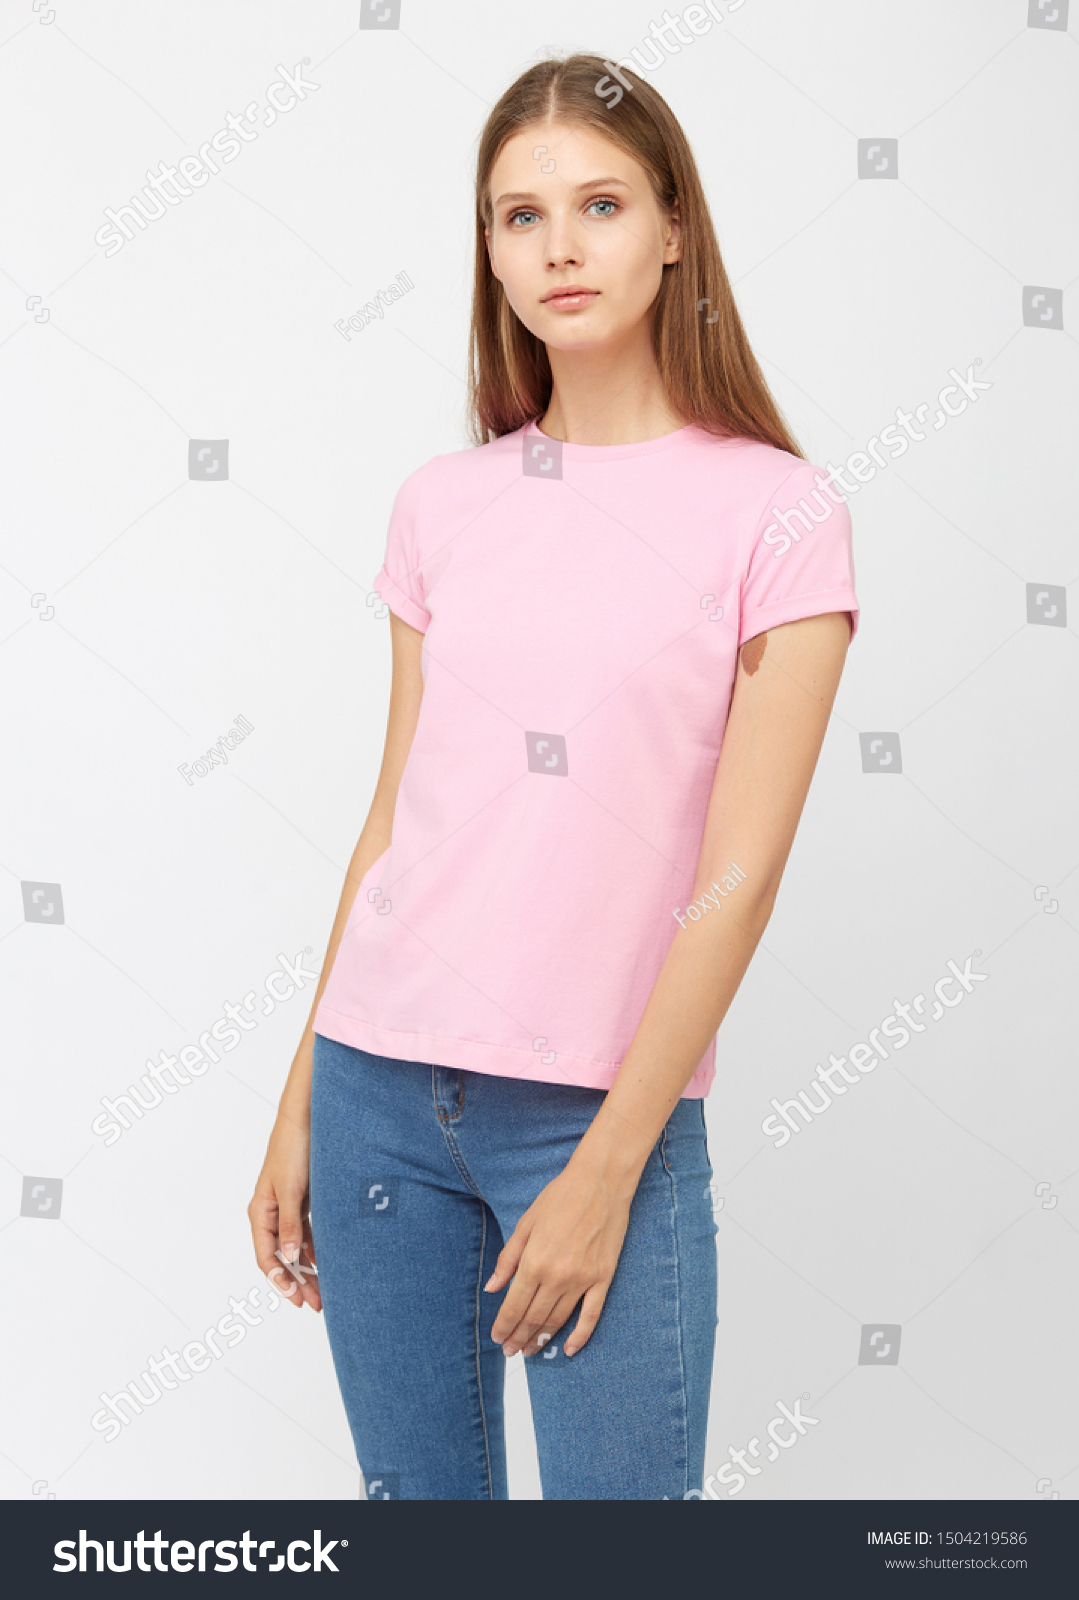 Teenager Girl Jeans Pink Tshirt On ...